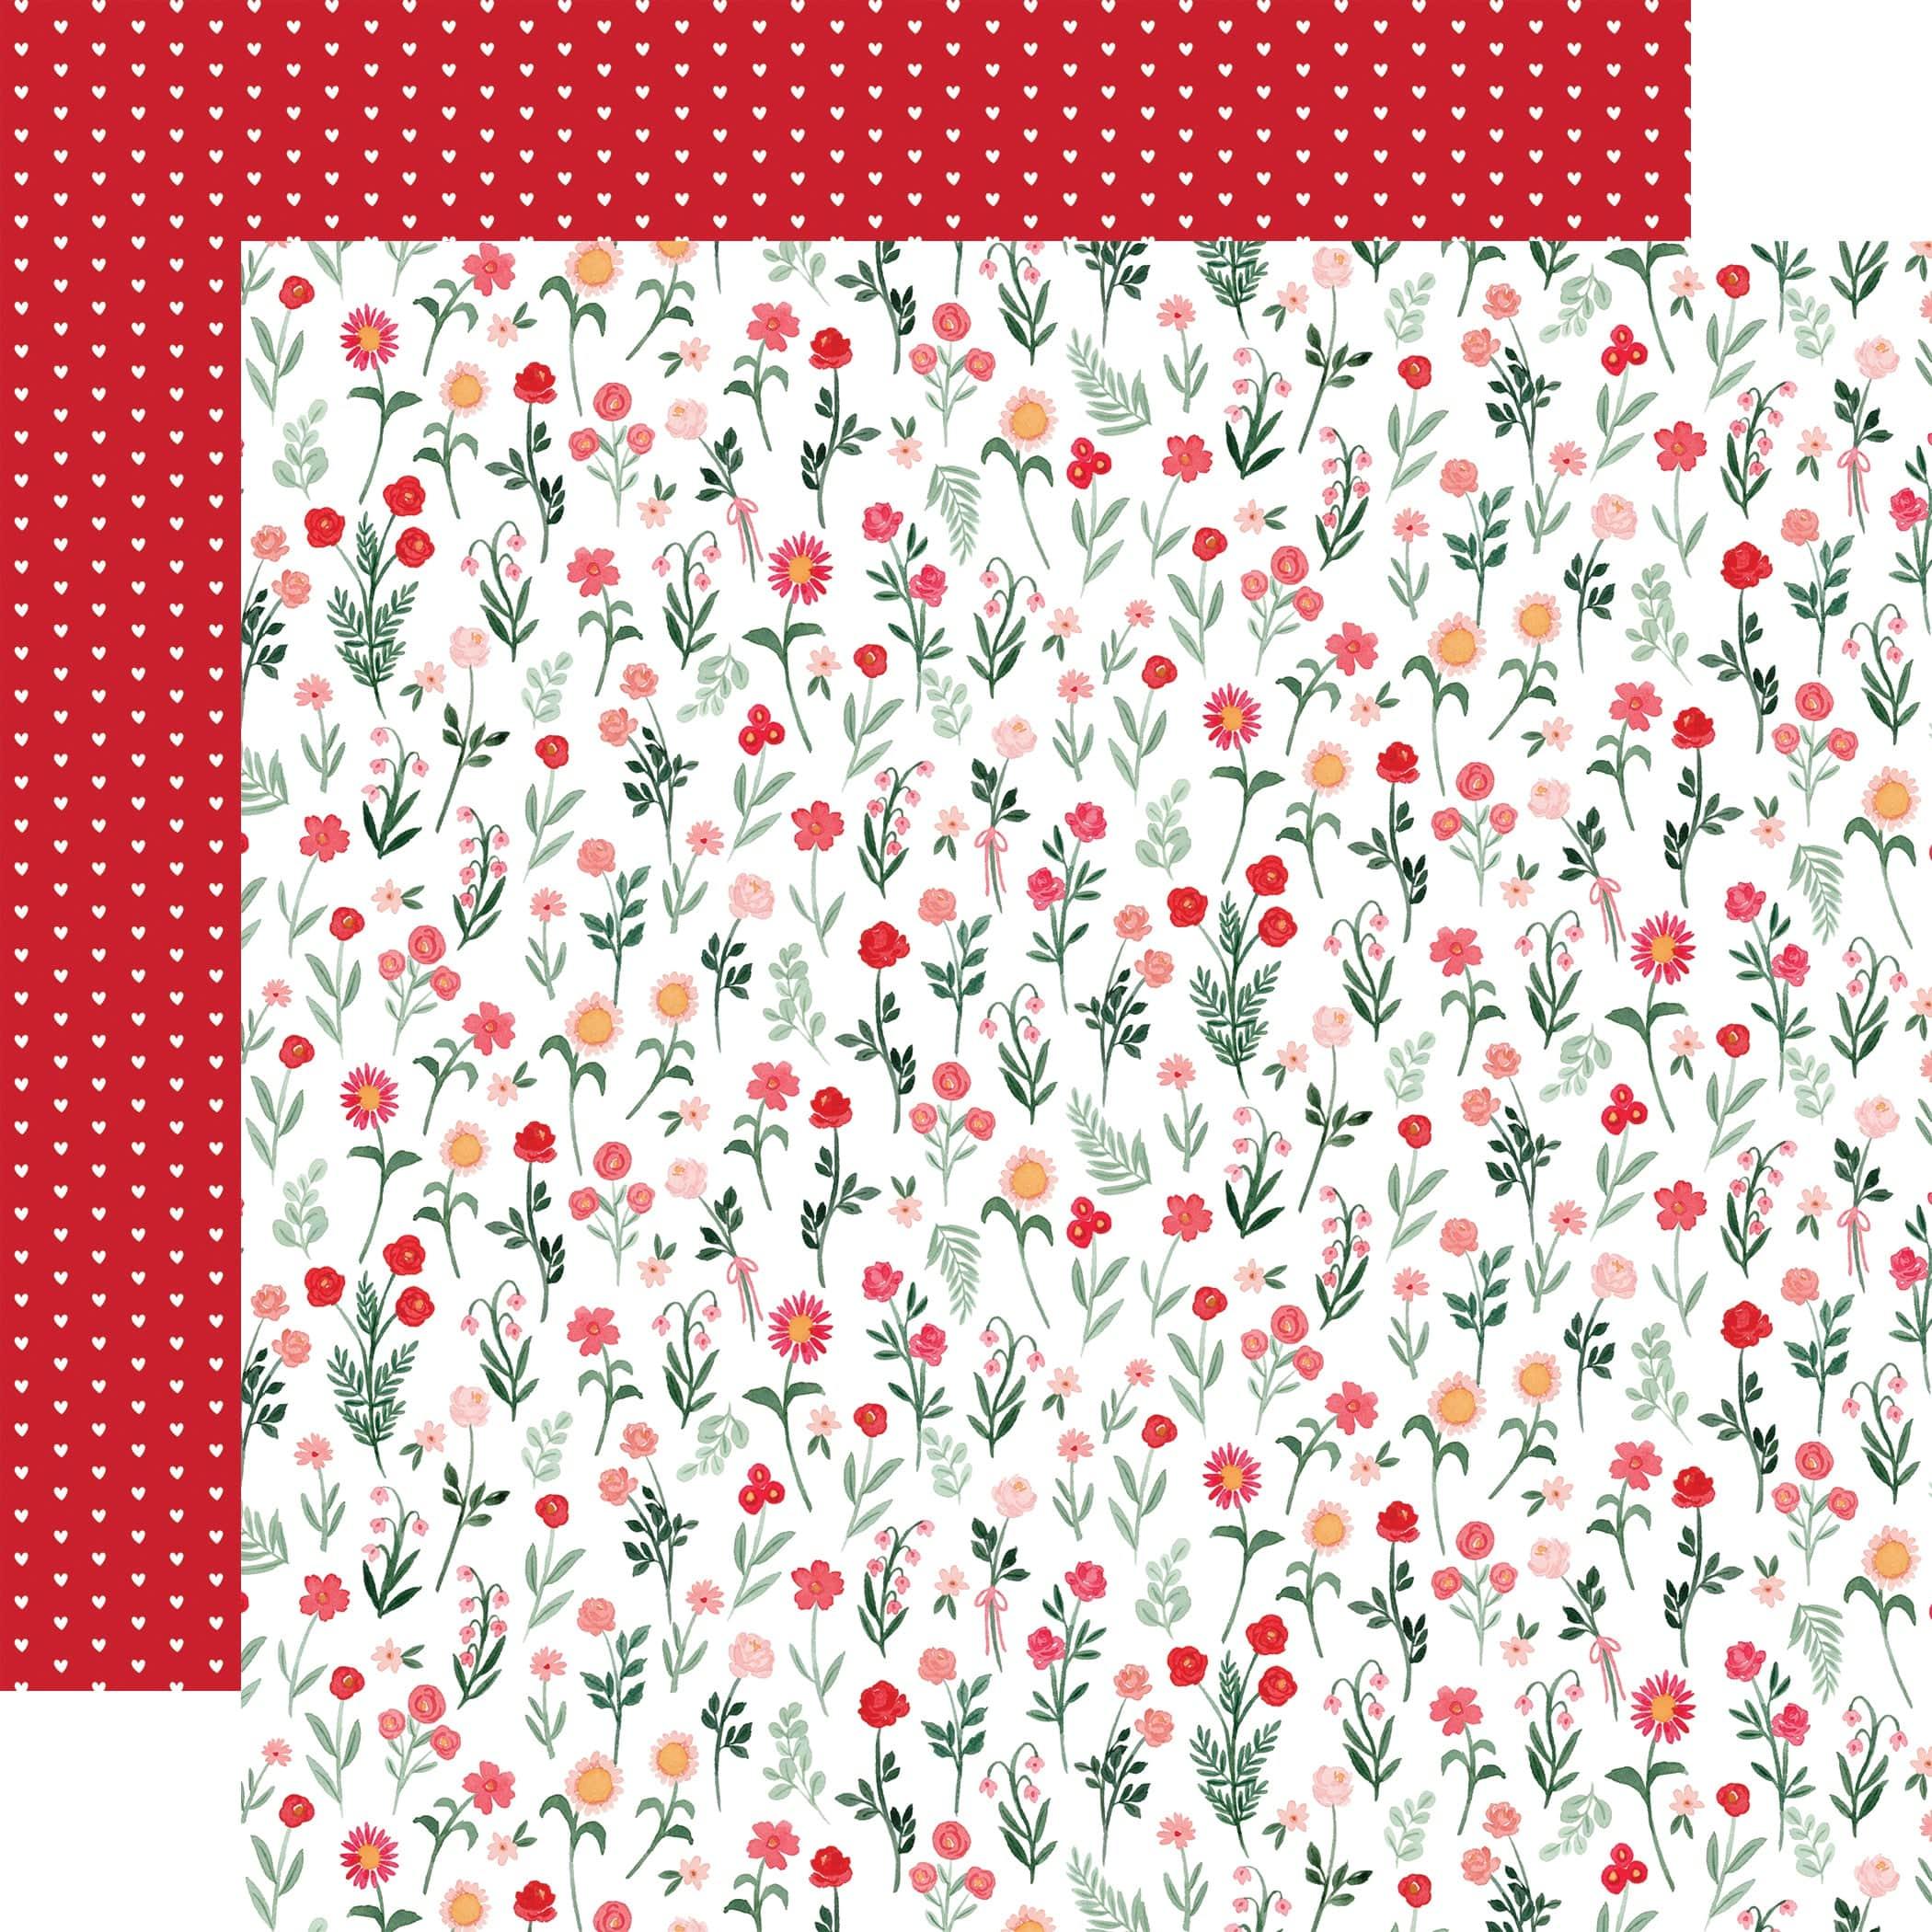 My Valentine Collection Valentine Blooms 12 x 12 Double-Sided Scrapbook Paper by Carta Bella - Scrapbook Supply Companies